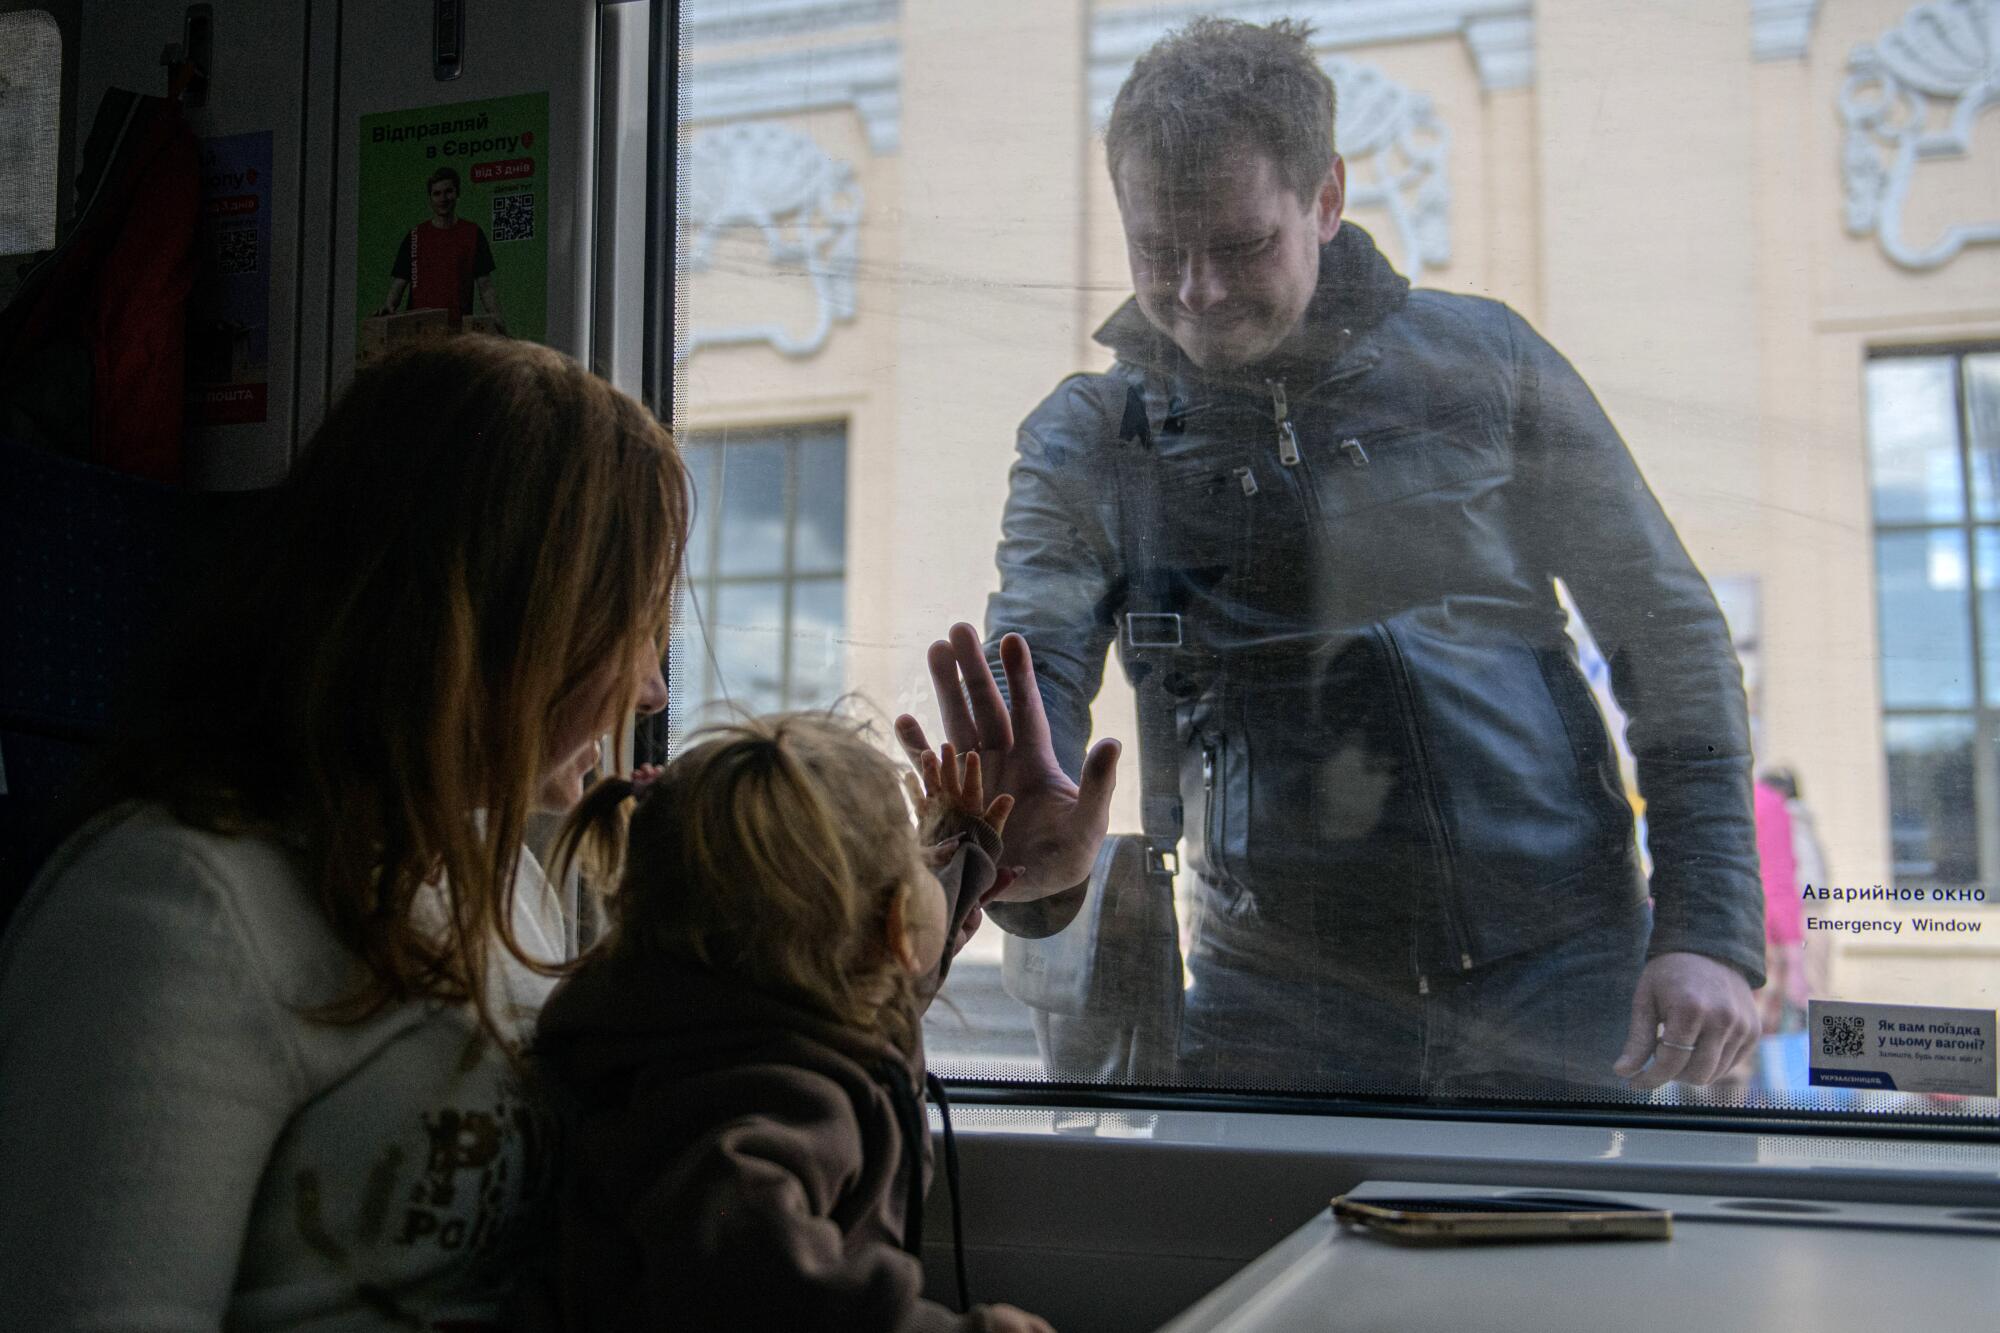 A man holds his palm to the glass window separating him from a woman and a child, who puts her palm to his 